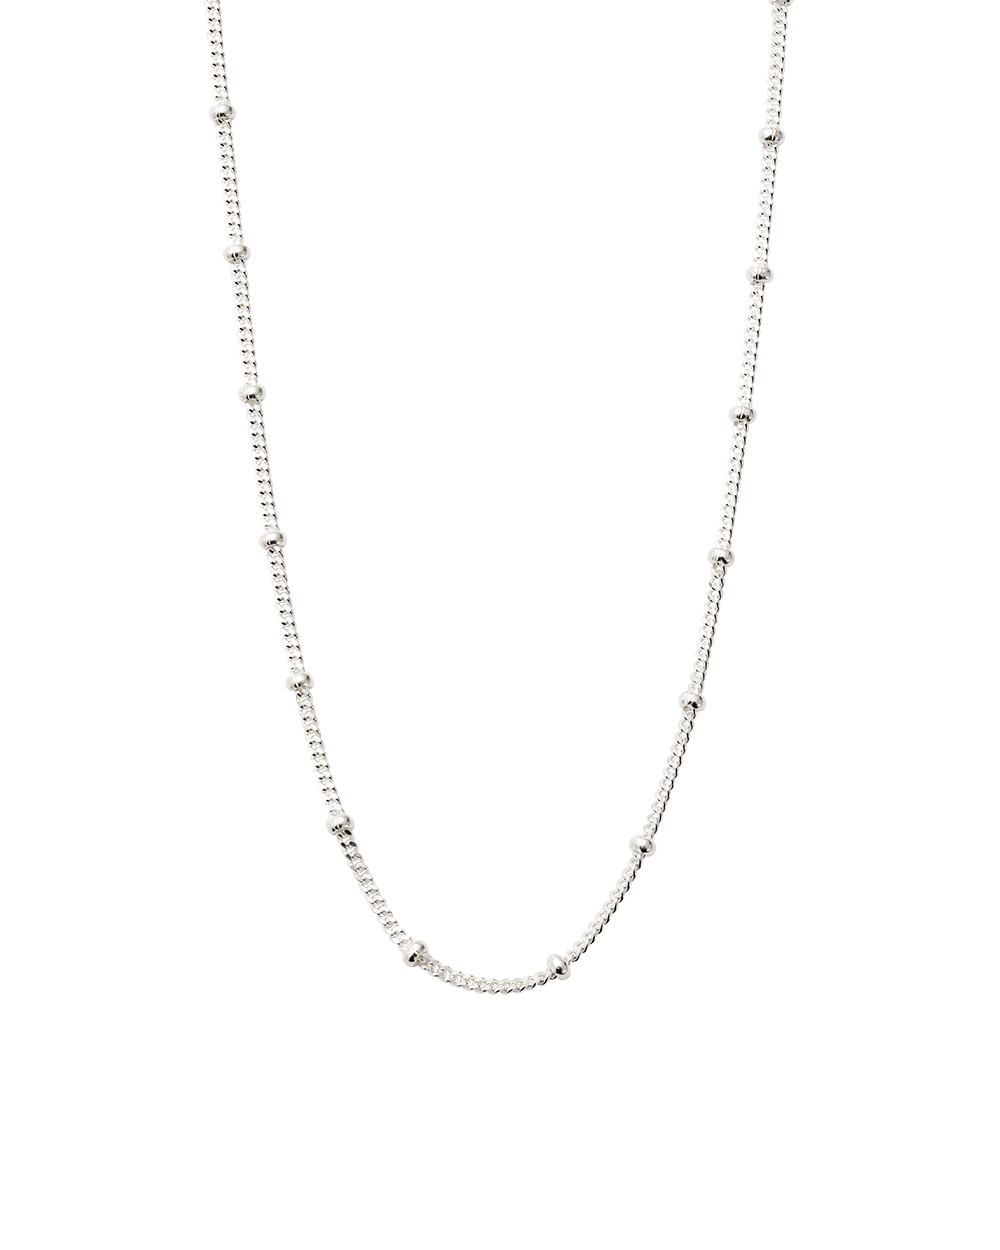 Kirstin Ash Necklaces Kirstin Ash Ball Chain 22-25'' Sterling Silver